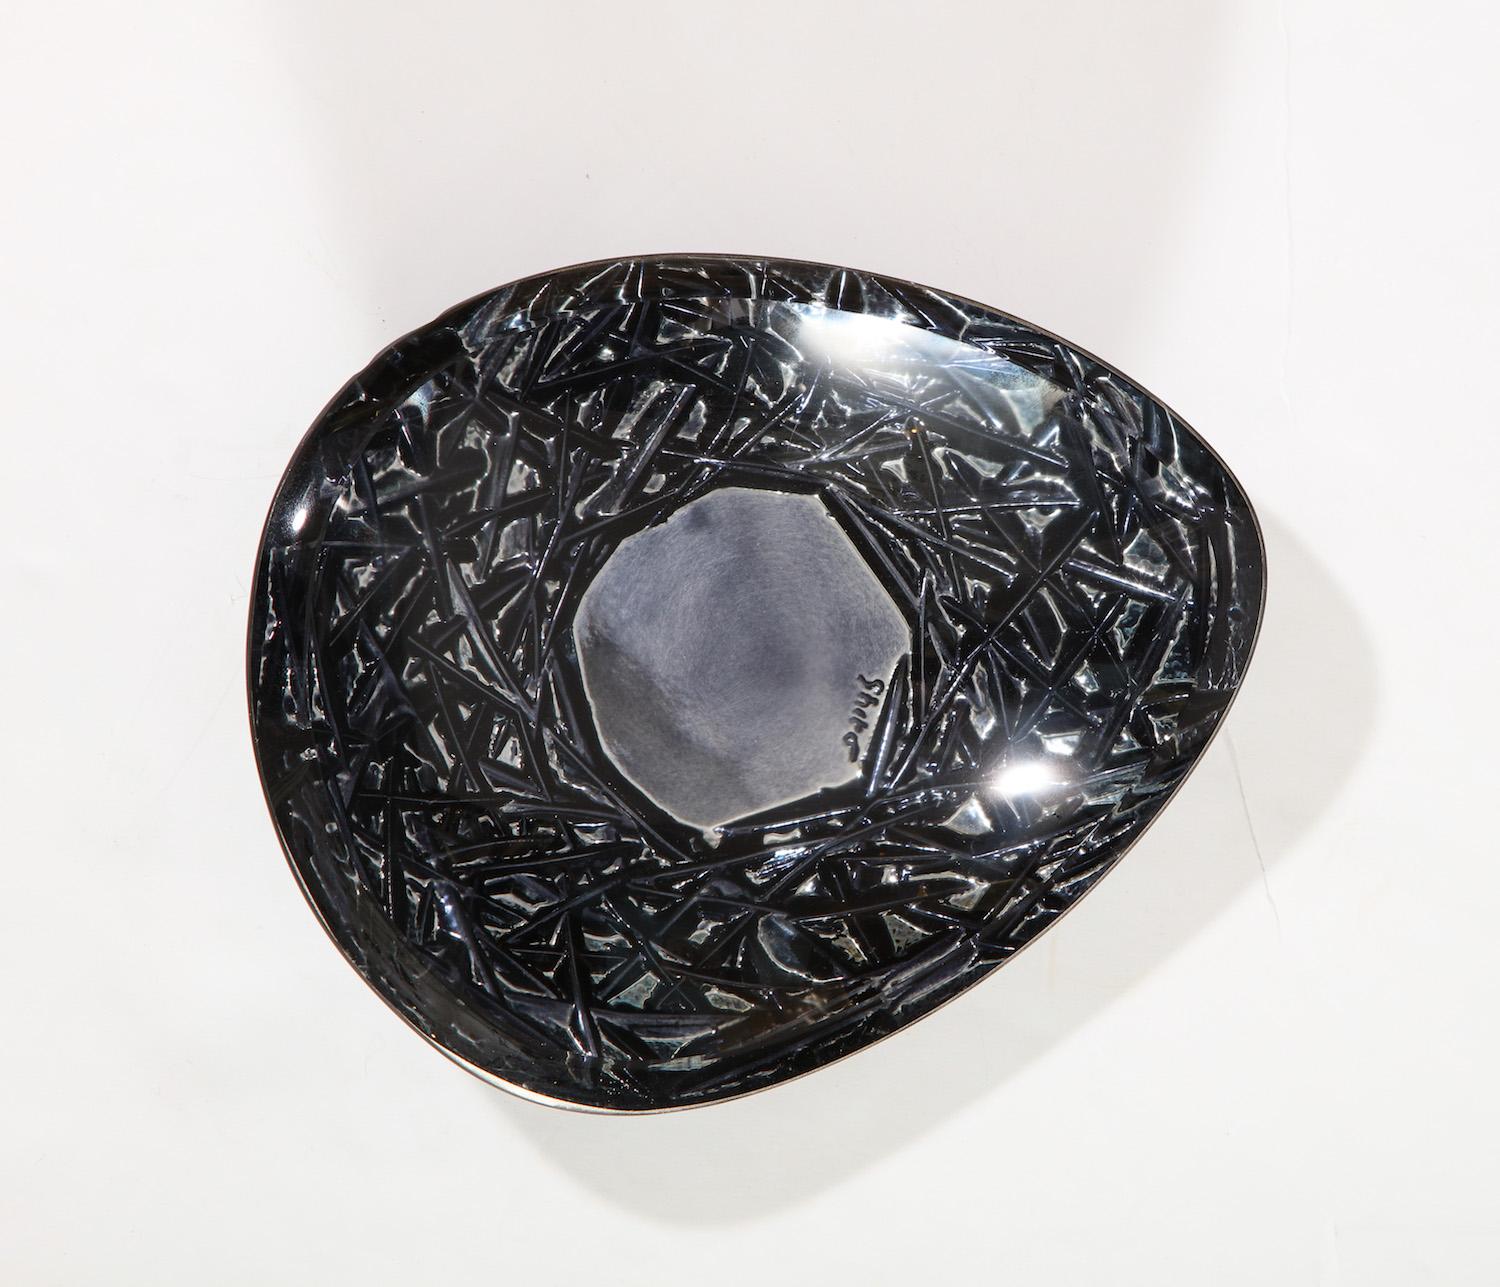 Irregularly- shaped, hand carved dish with deep engravings to underside, and dark coloring infused with metallic elements. Artist-signed on underside.